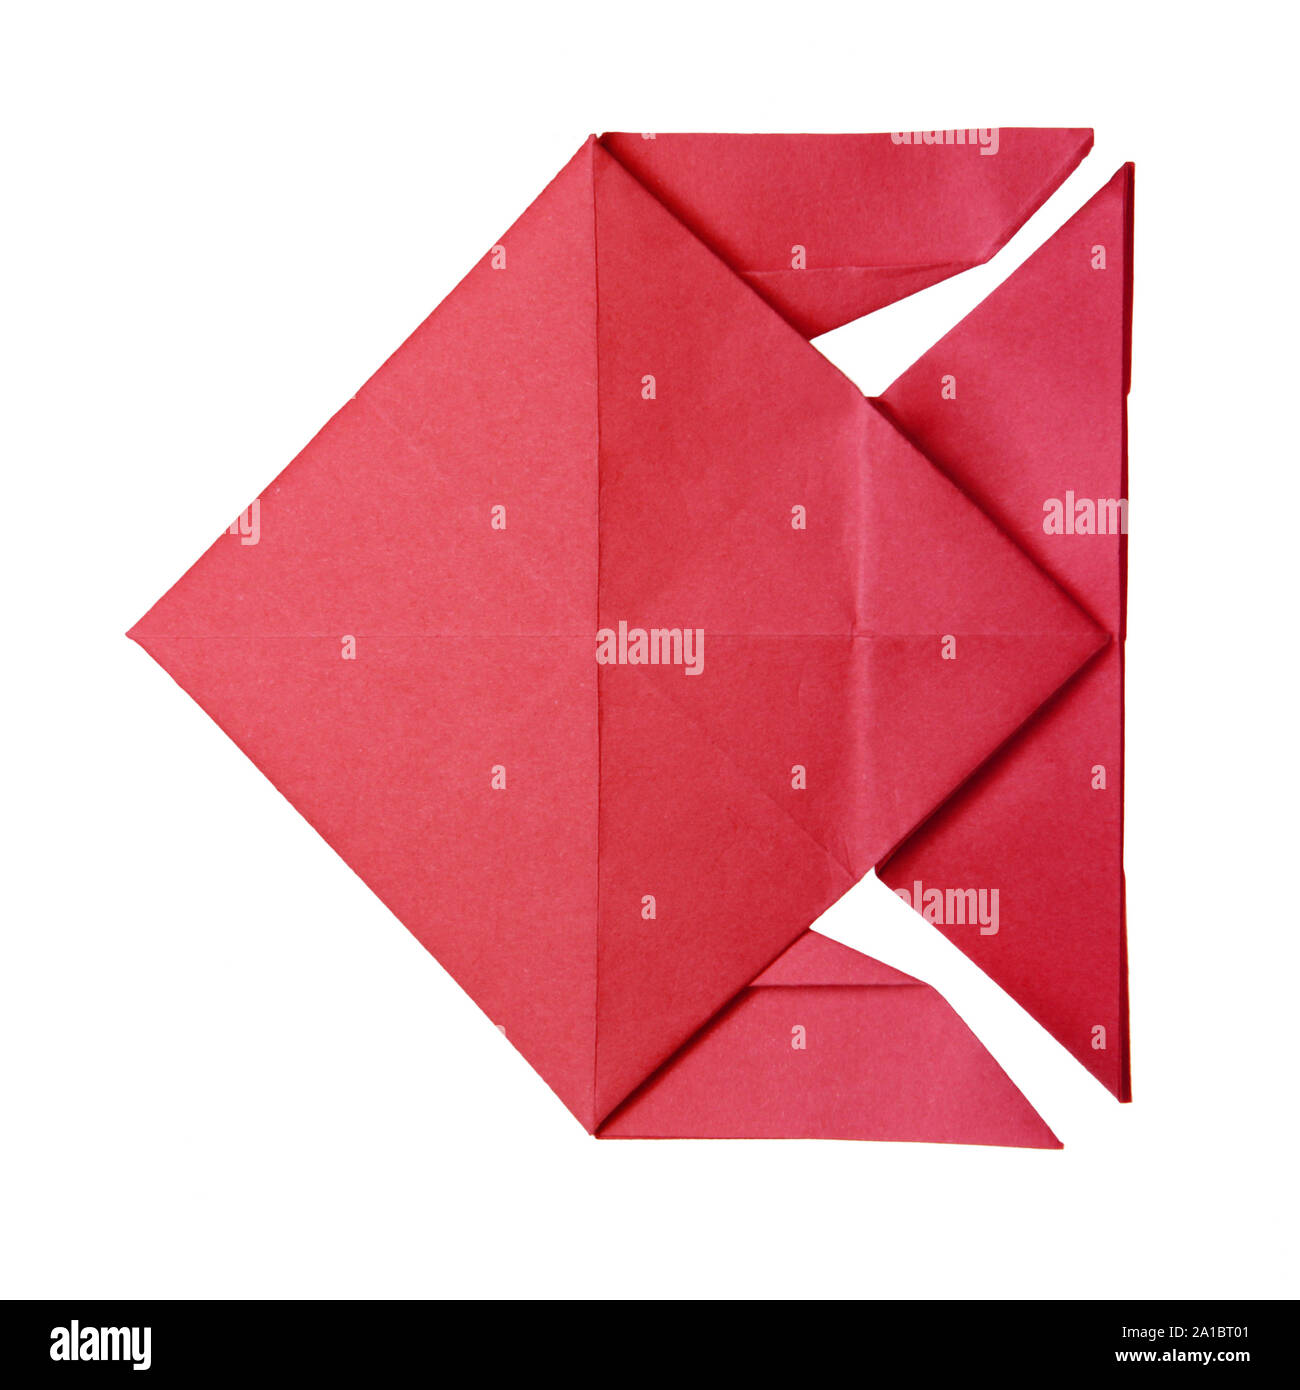 Origami red fish Stock Photo